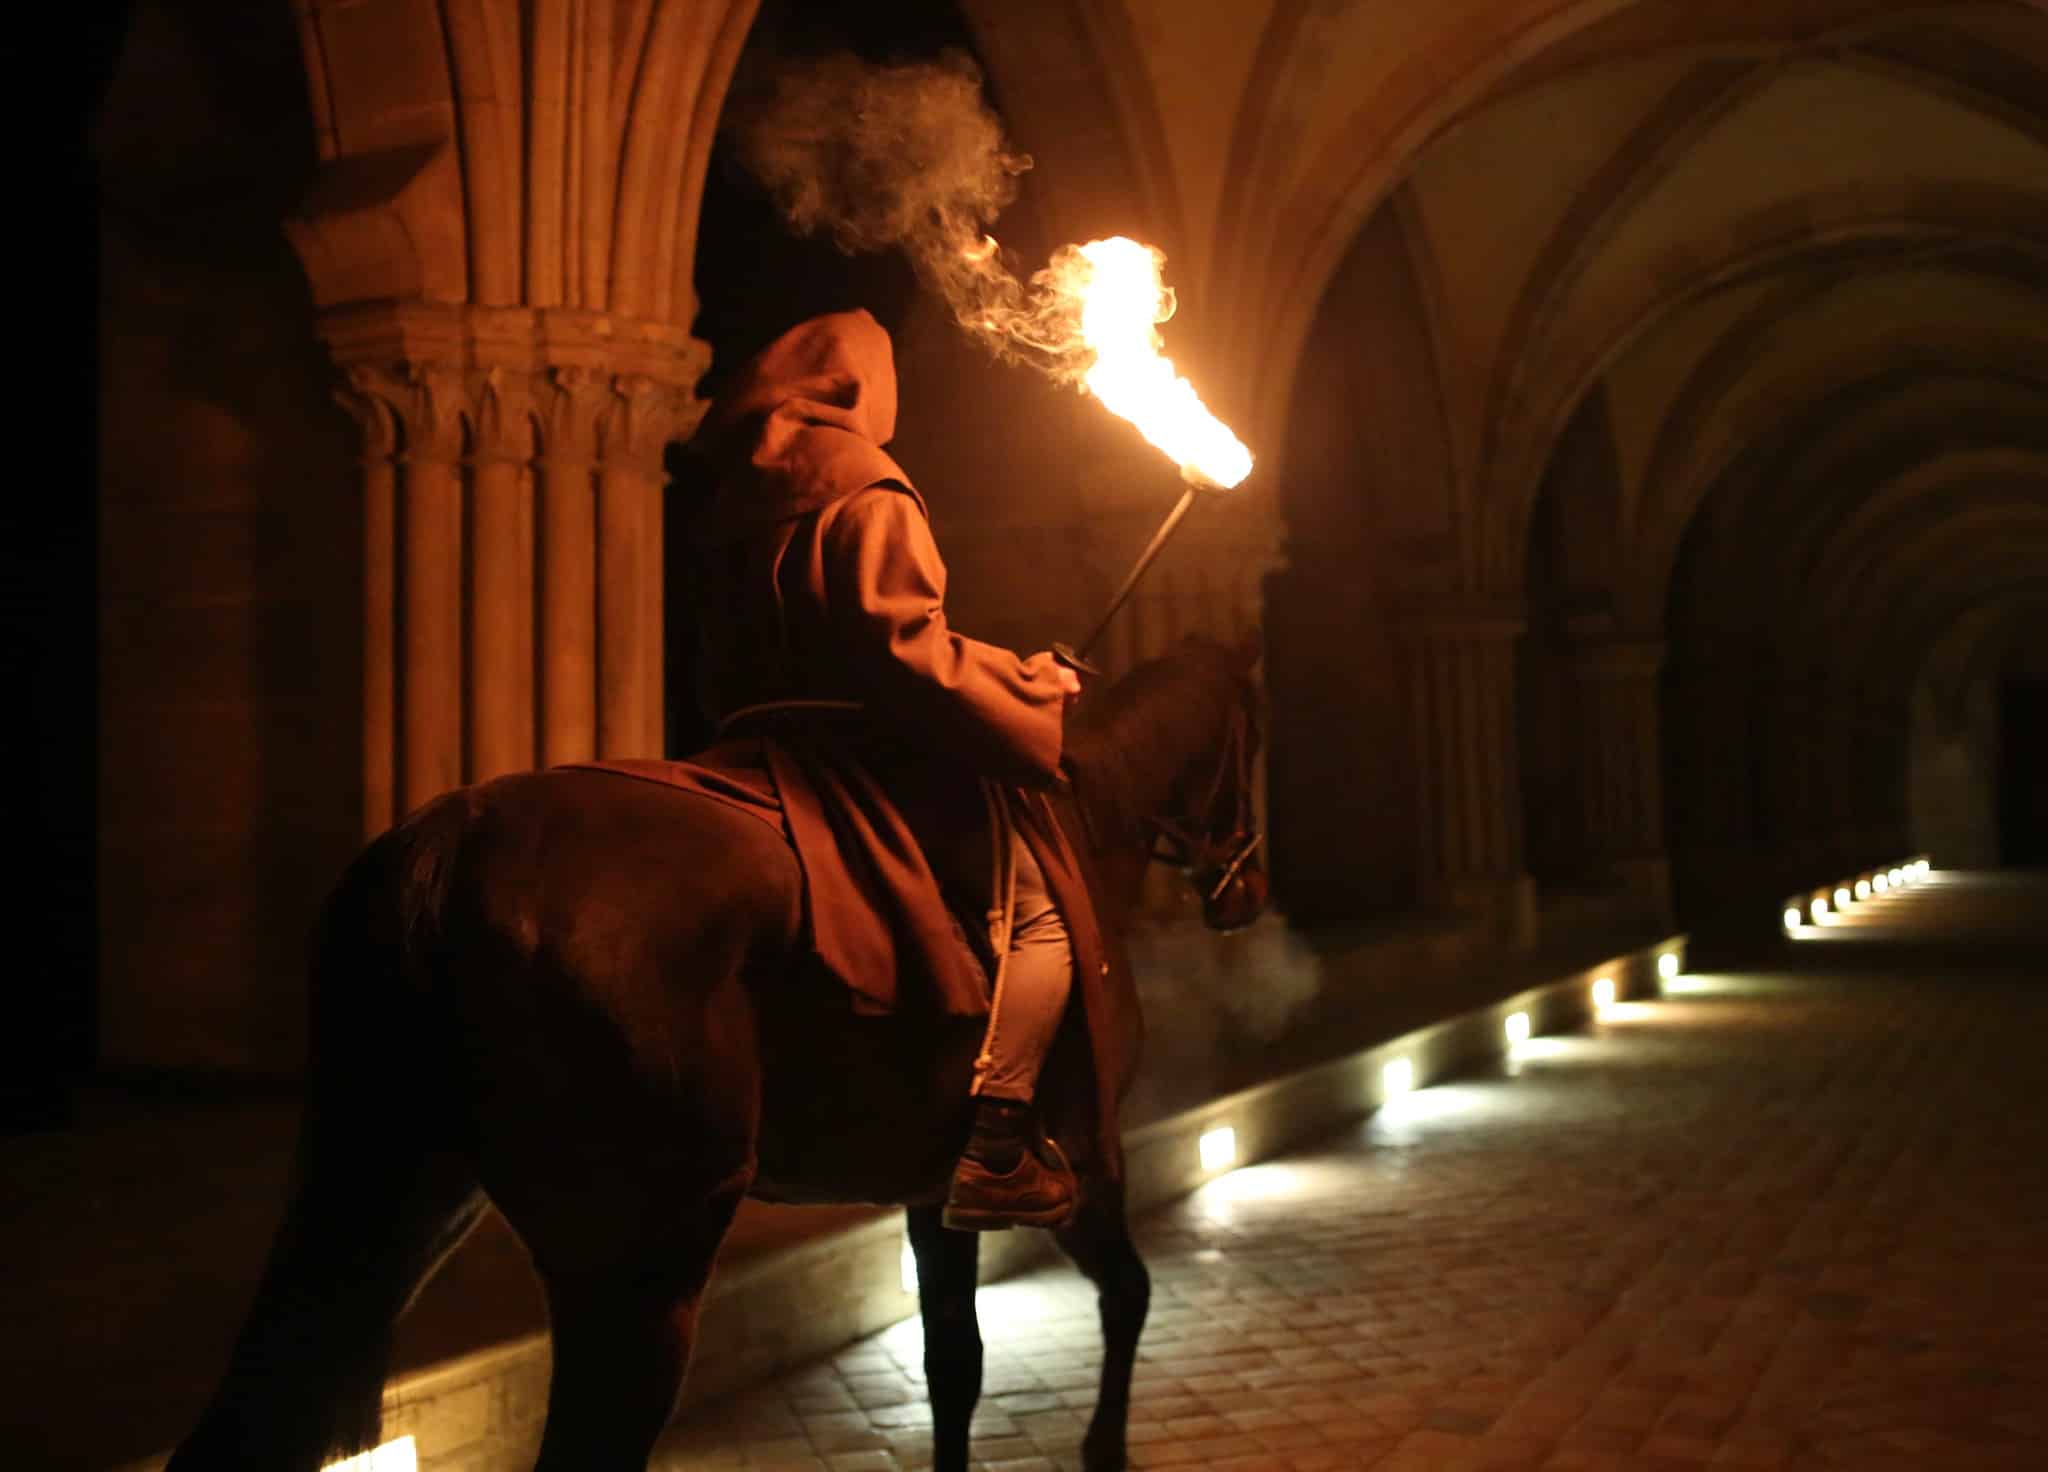 cheval-acteur-moine-torche-lueur-bougies-cloitre-abbaye-de-royaumont-france-teaser-video-soiree-insolite-the-last-monastery-5-ans-wato-agence-wato-we-are-the-oracle-evenementiel-event